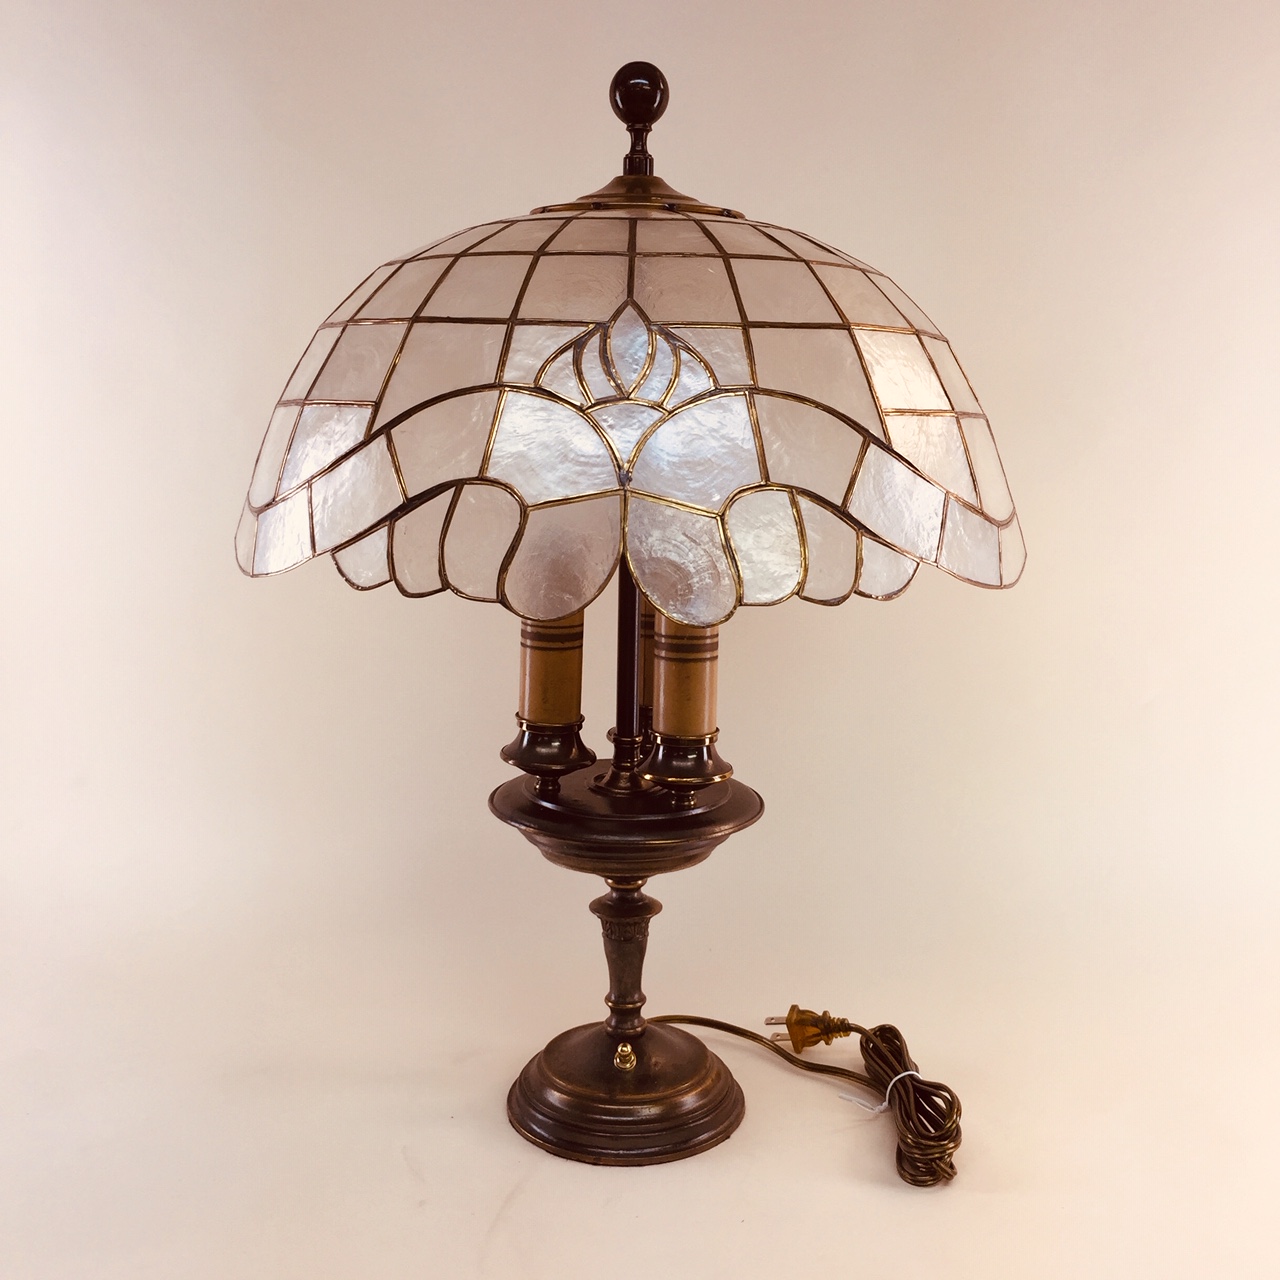 Three Light Table Lamp With Capiz Shade, How To Raise A Table Lamp